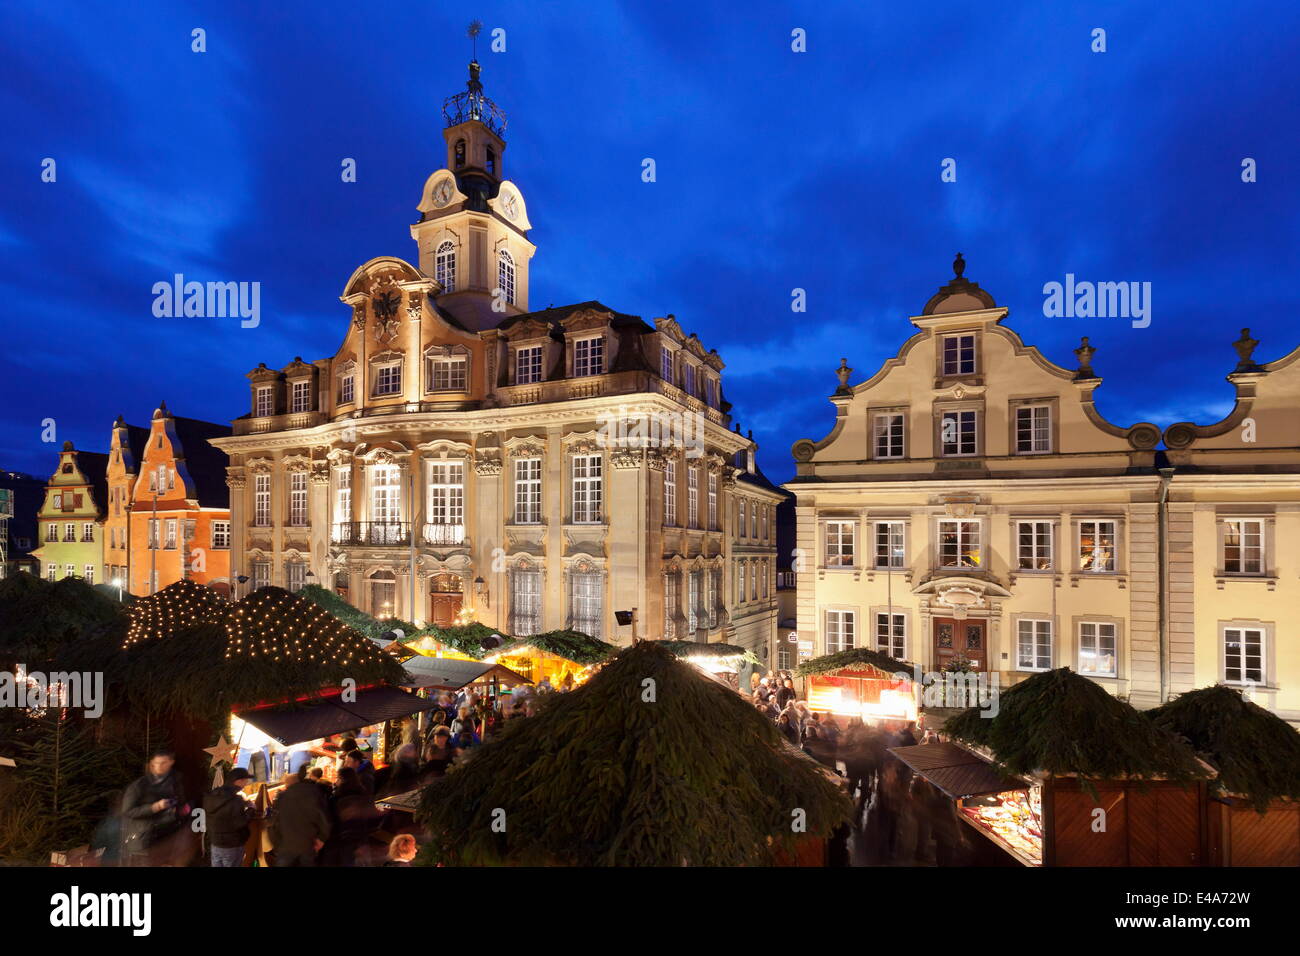 Christmas fair, Town Hall and Market Place, Schwaebisch Hall, Hohenlohe, Baden Wurttemberg, Germany, Europe Stock Photo